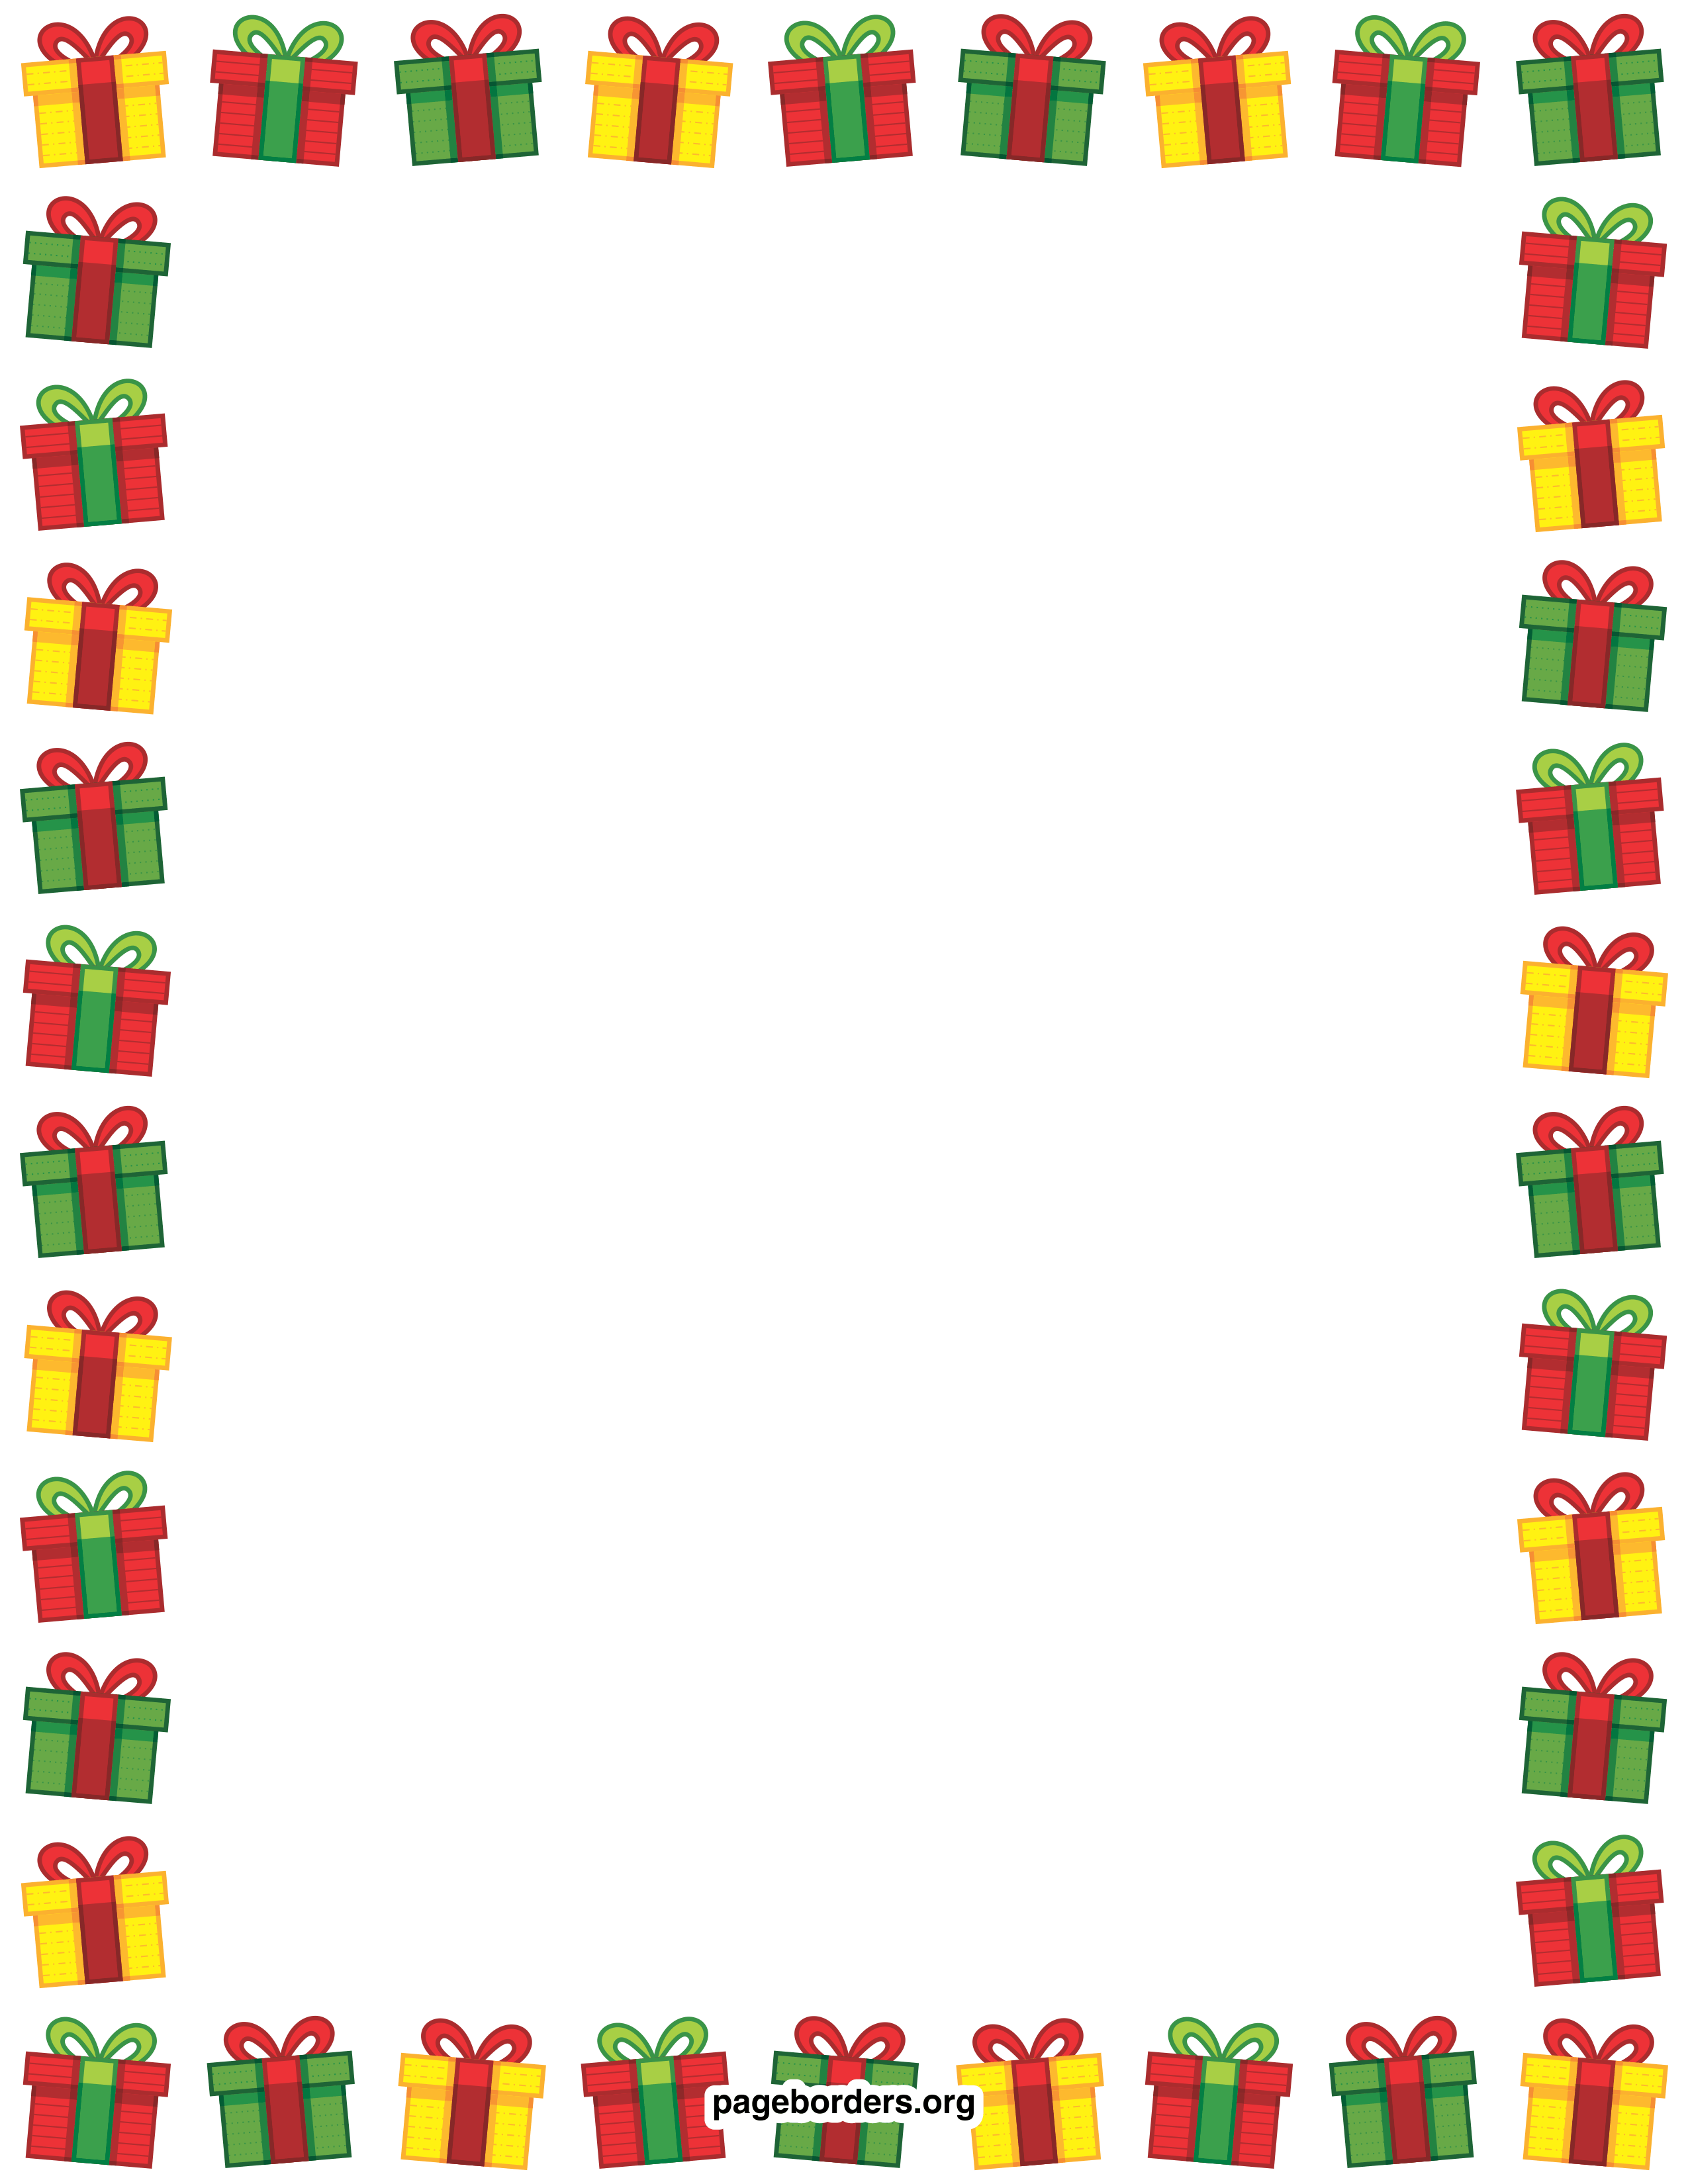 free-holiday-borders-cliparts-download-free-holiday-borders-cliparts